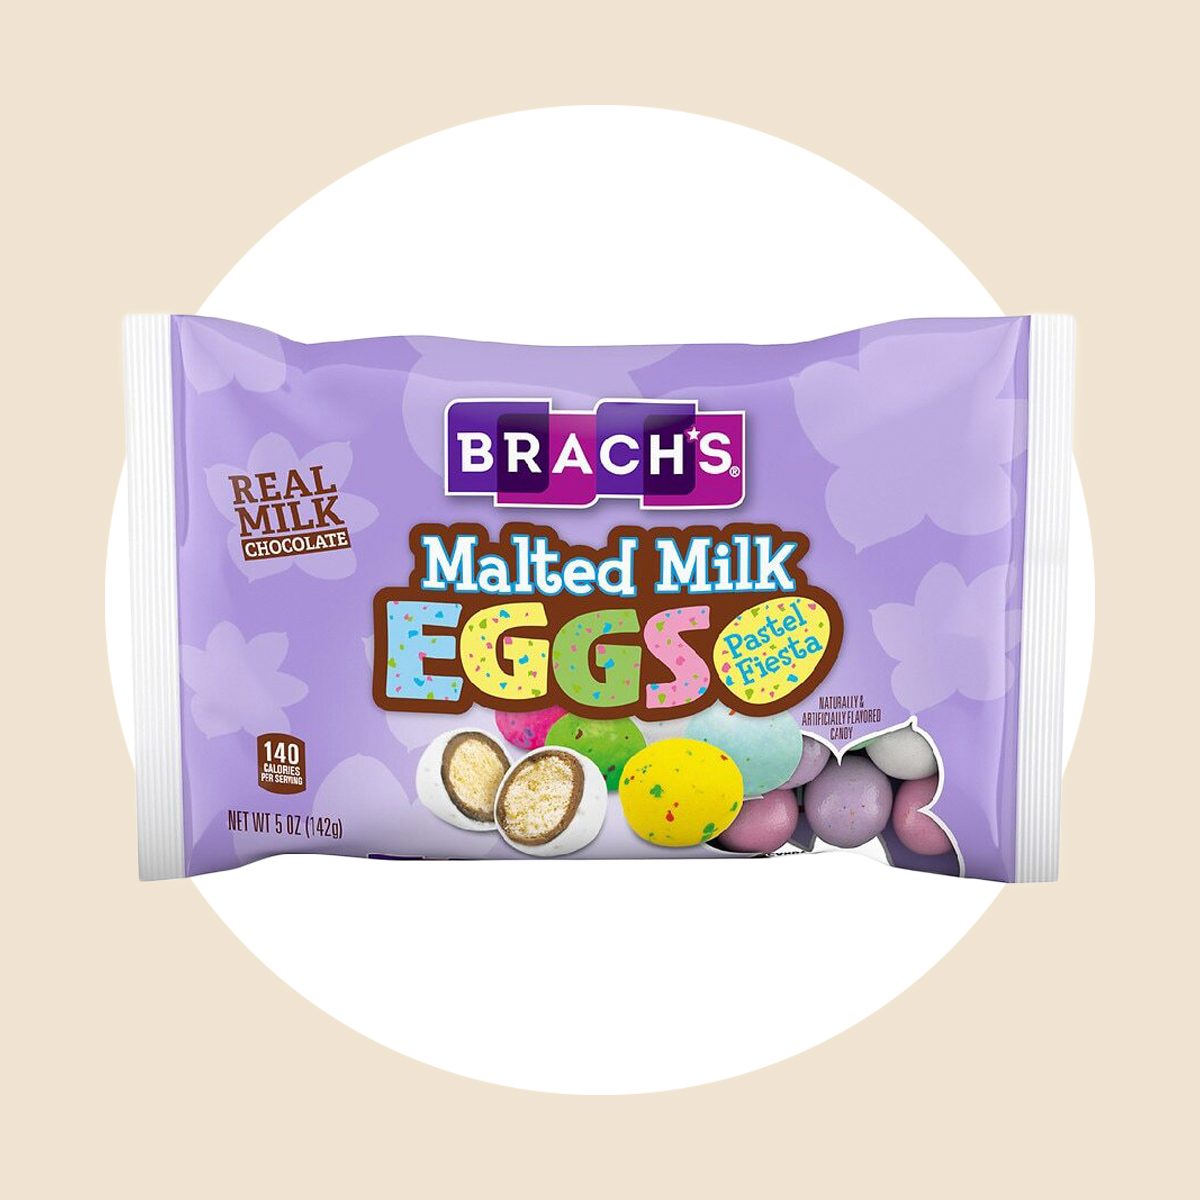 Branches Malted Milk Eggs Easter Candy